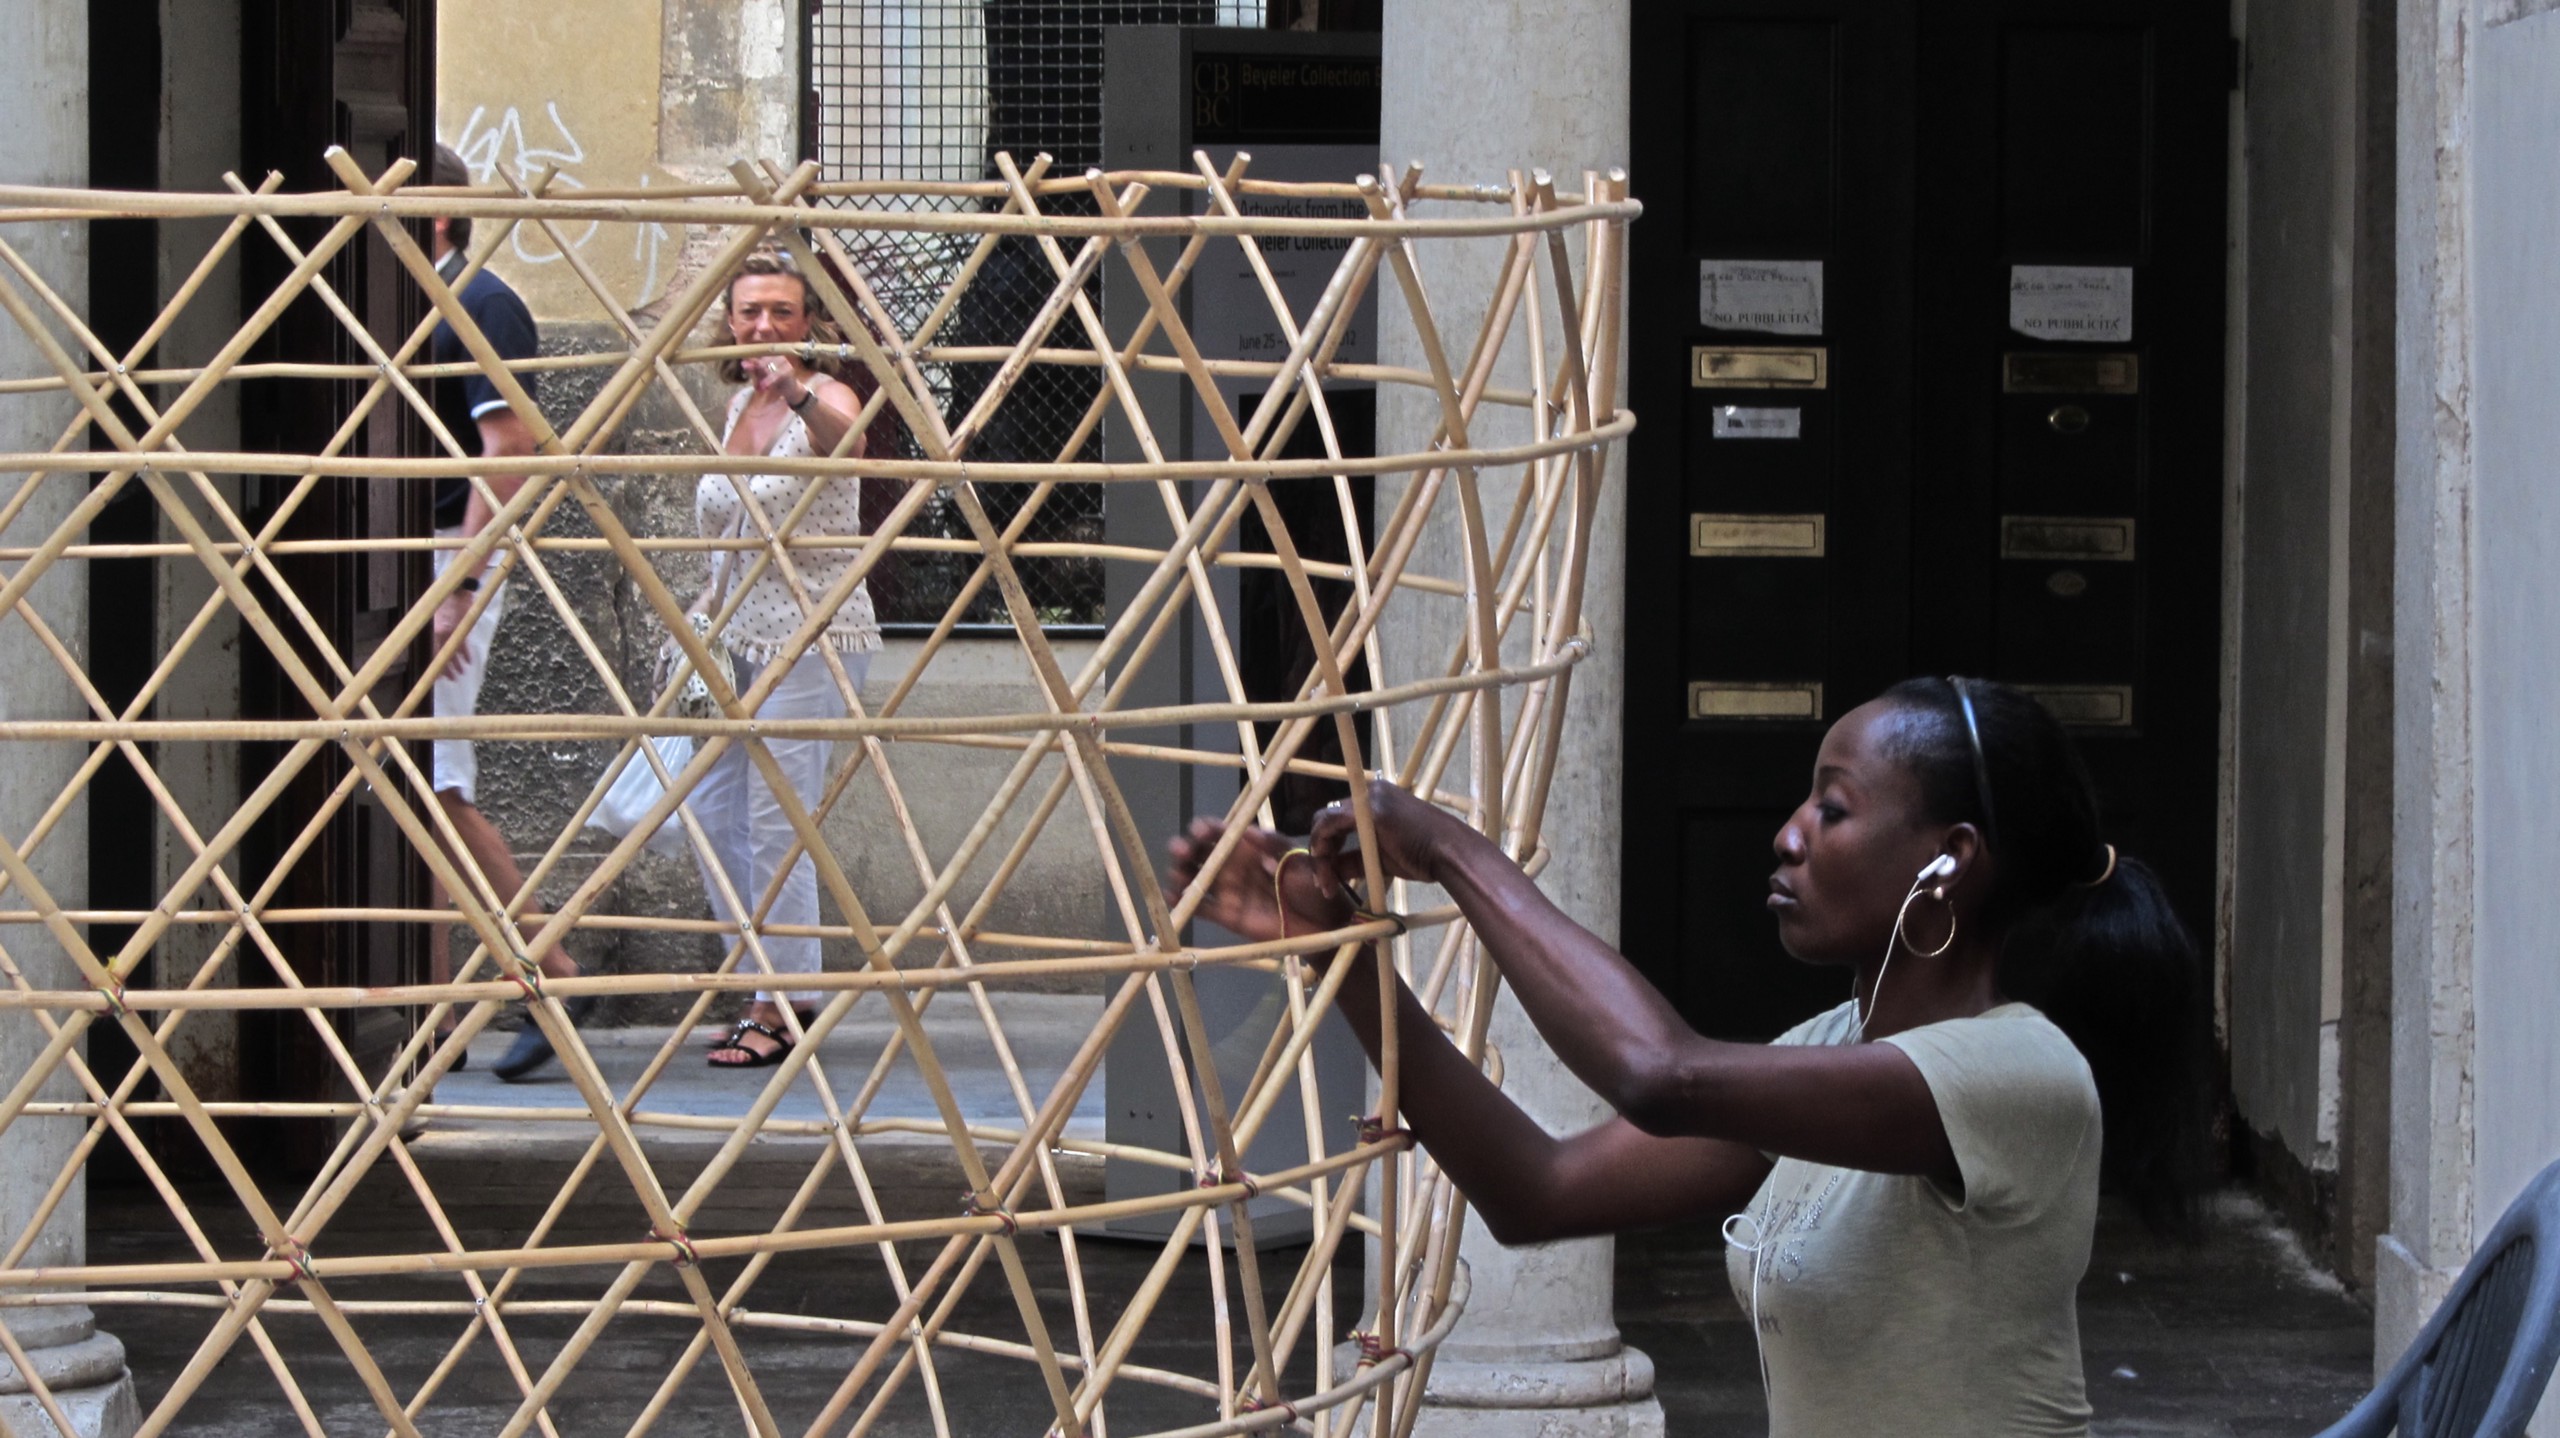 A woman interweaves bamboo canes to construct a large tower structure.